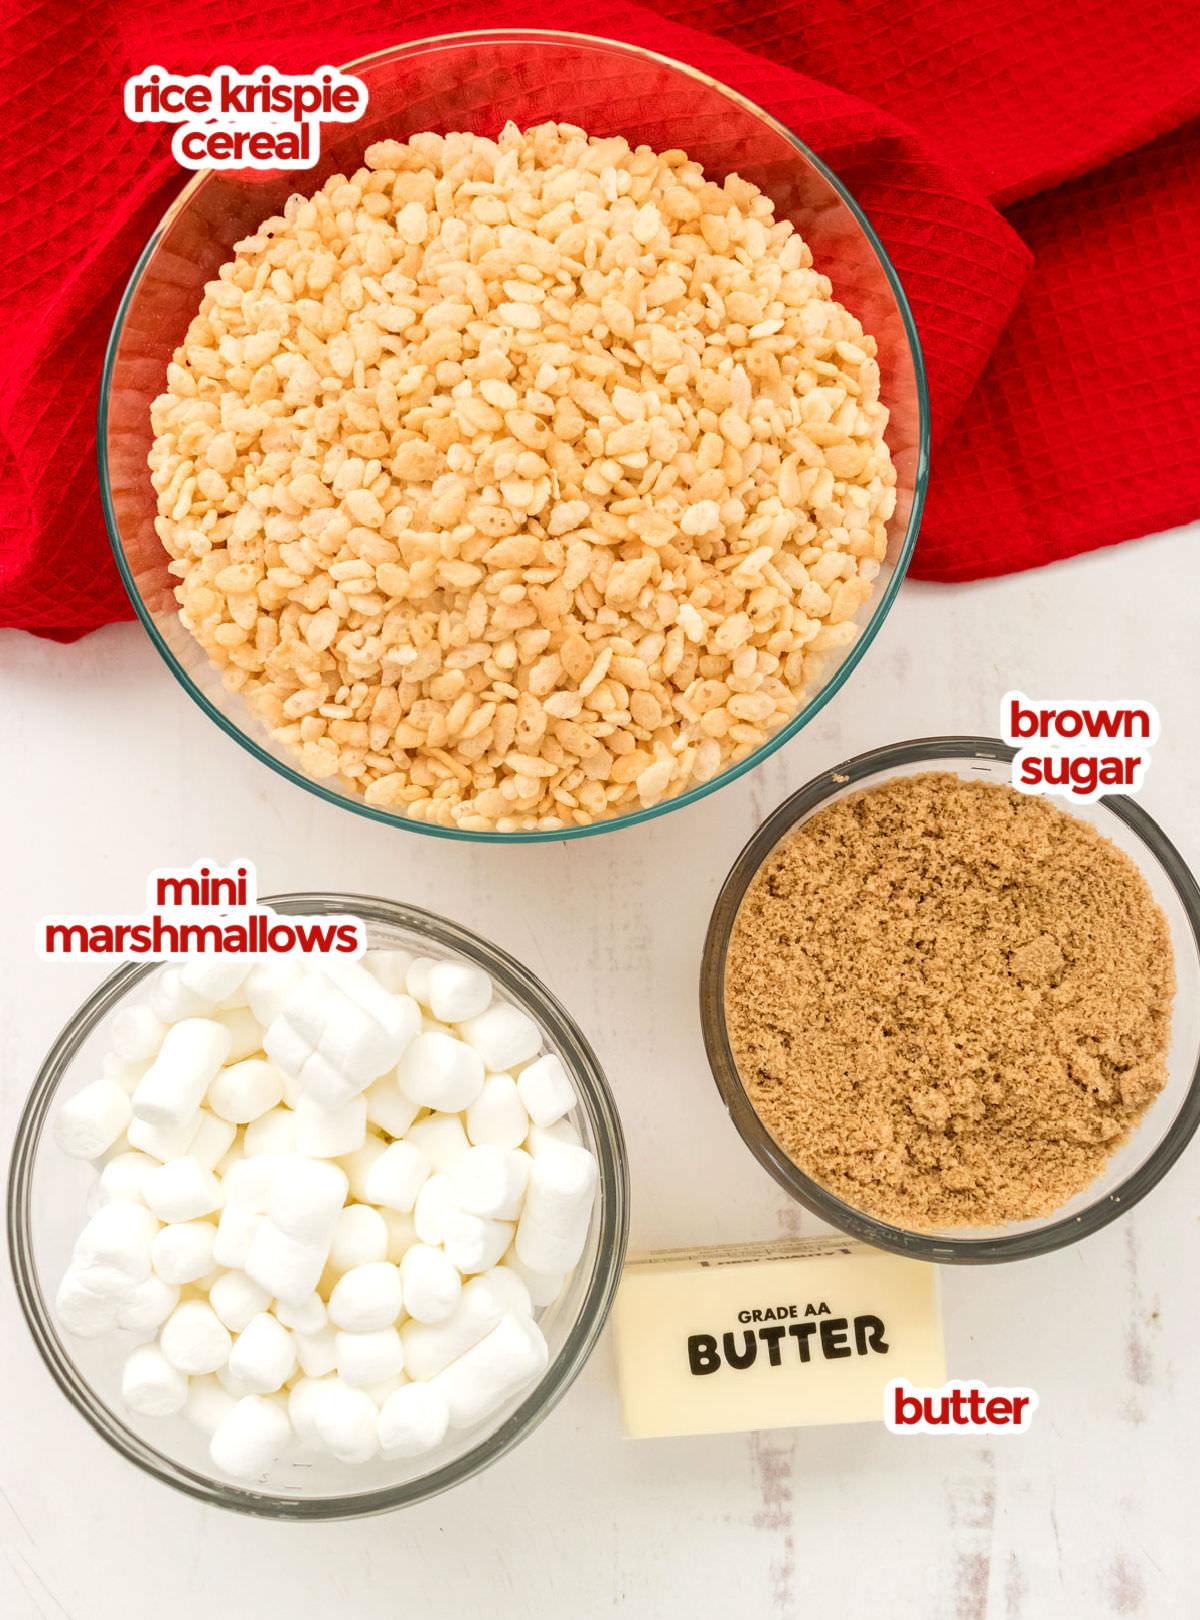 All the ingredients you will need to make Caramel Rice Krispie Treats including Rice Krispie Cereal, Brown Sugar, Mini Marshmallows and Butter.